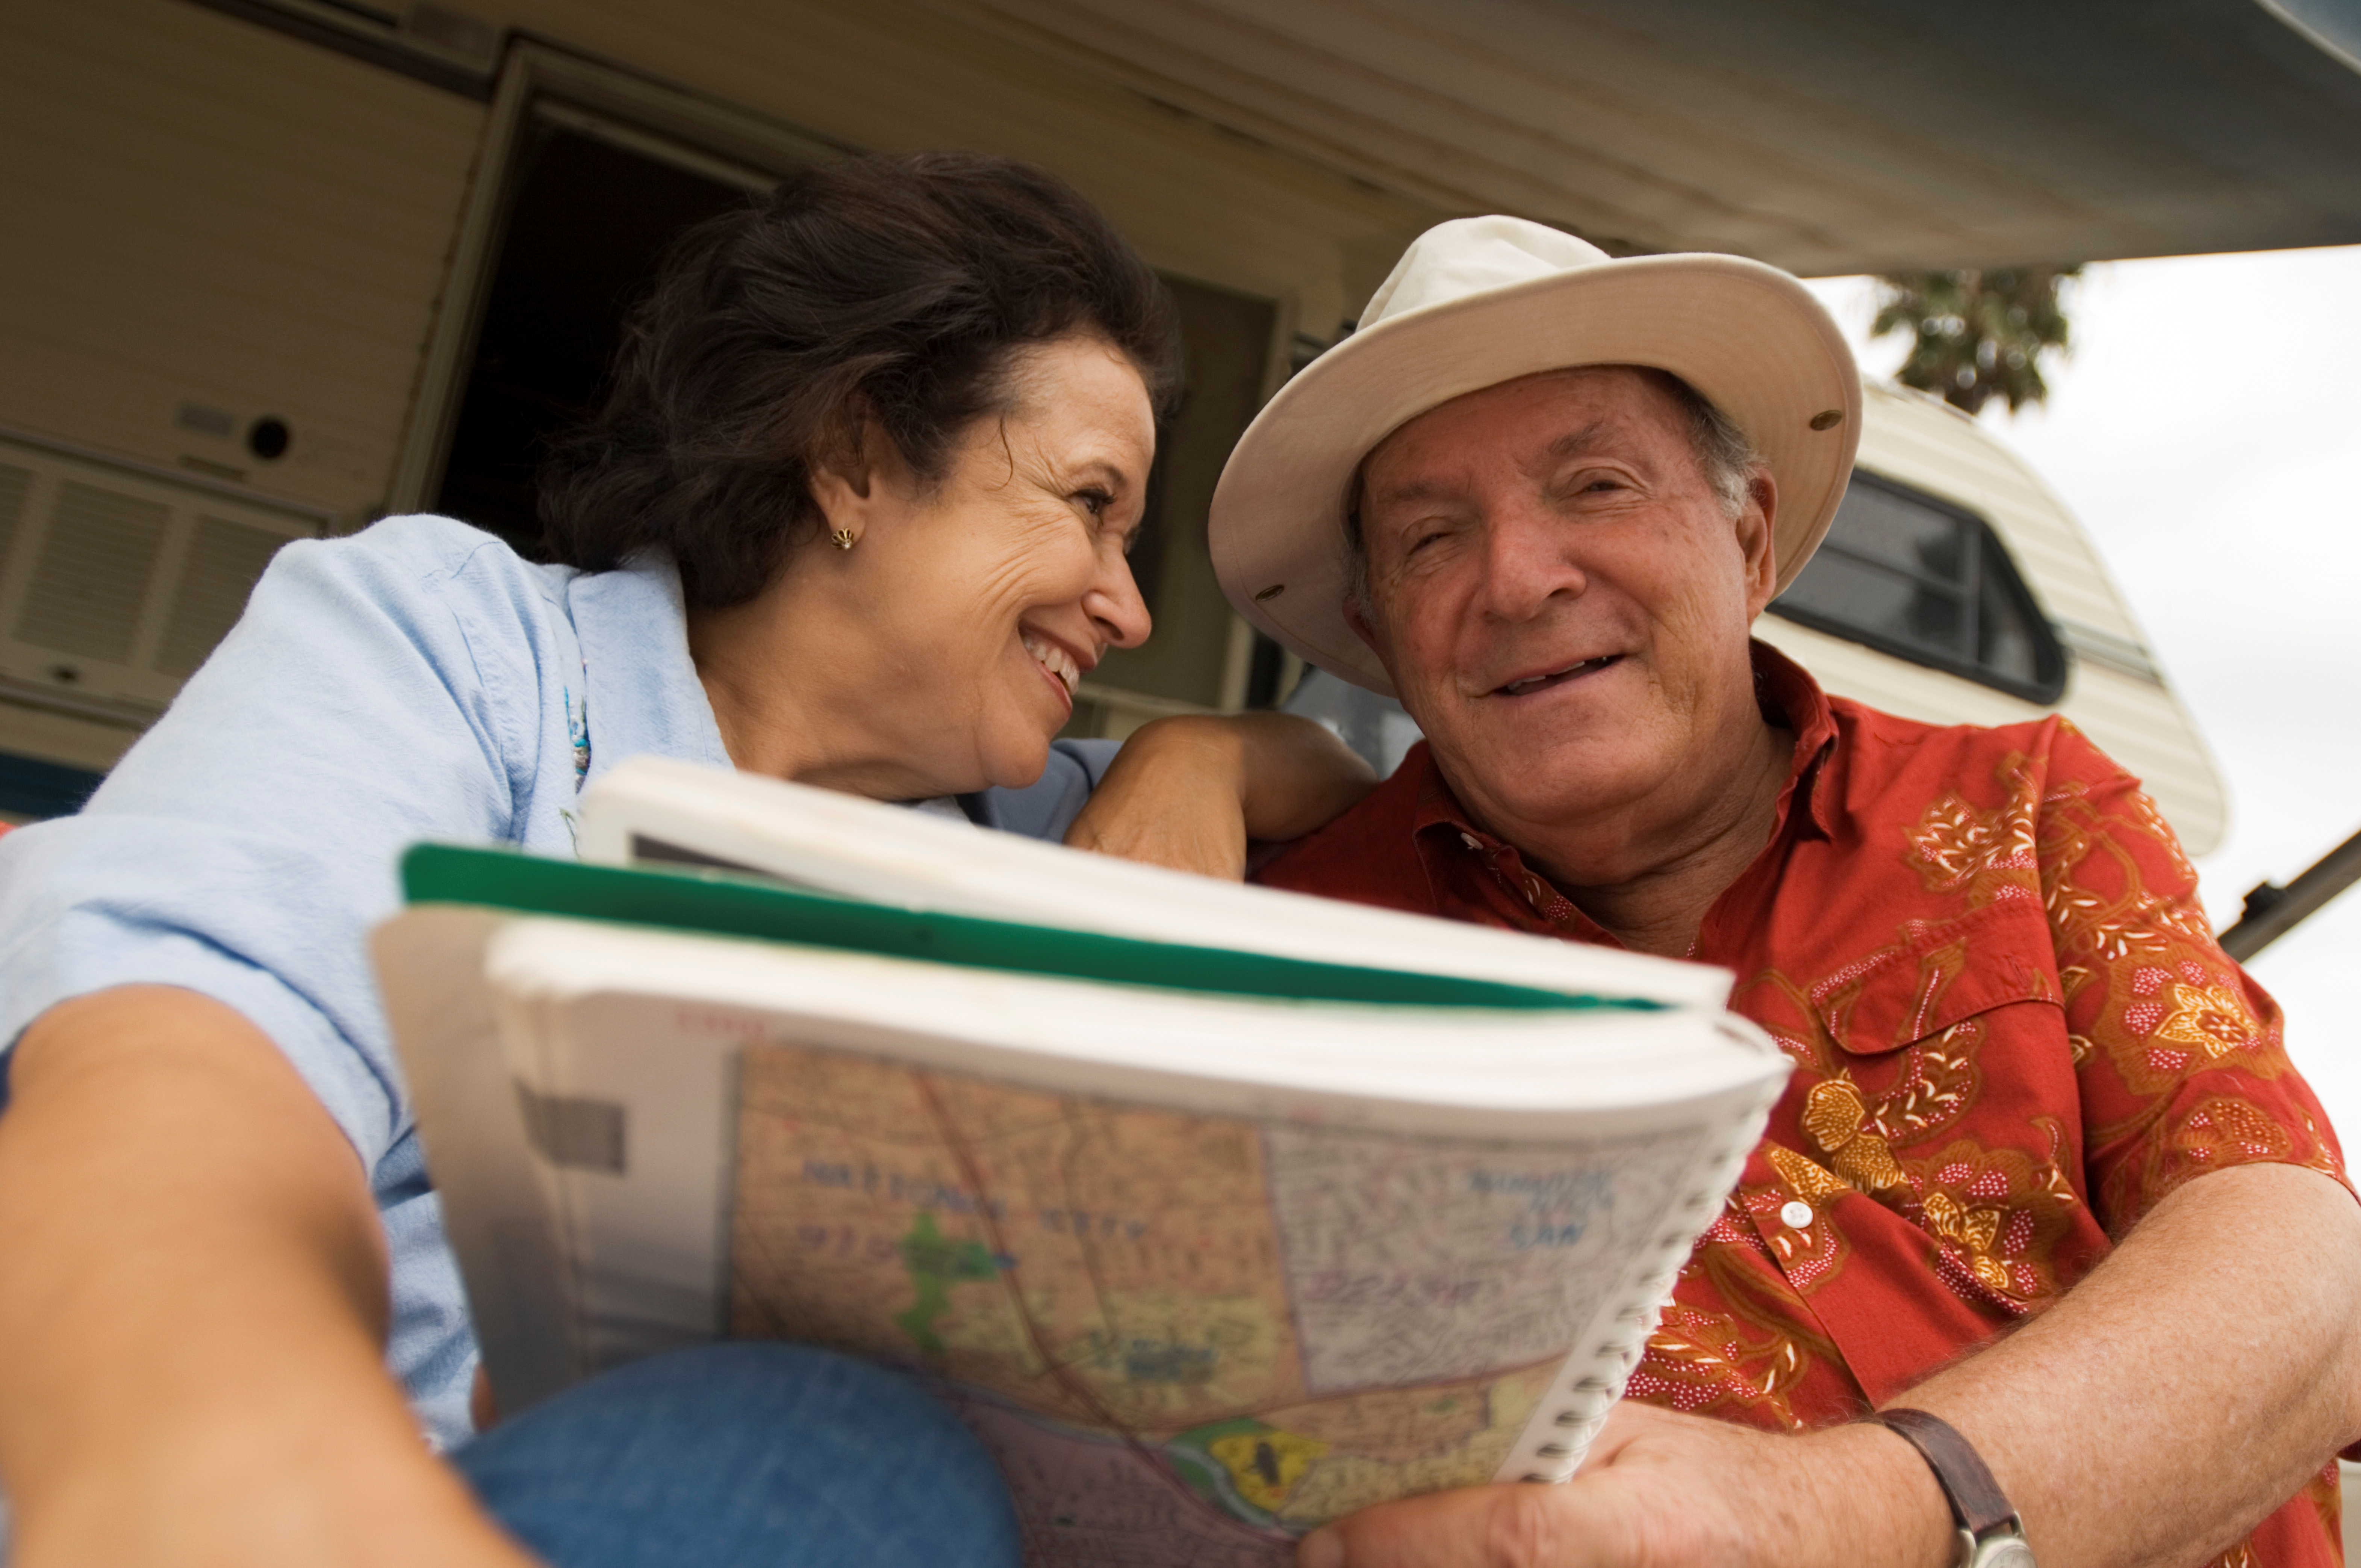 Can people with dementia travel?